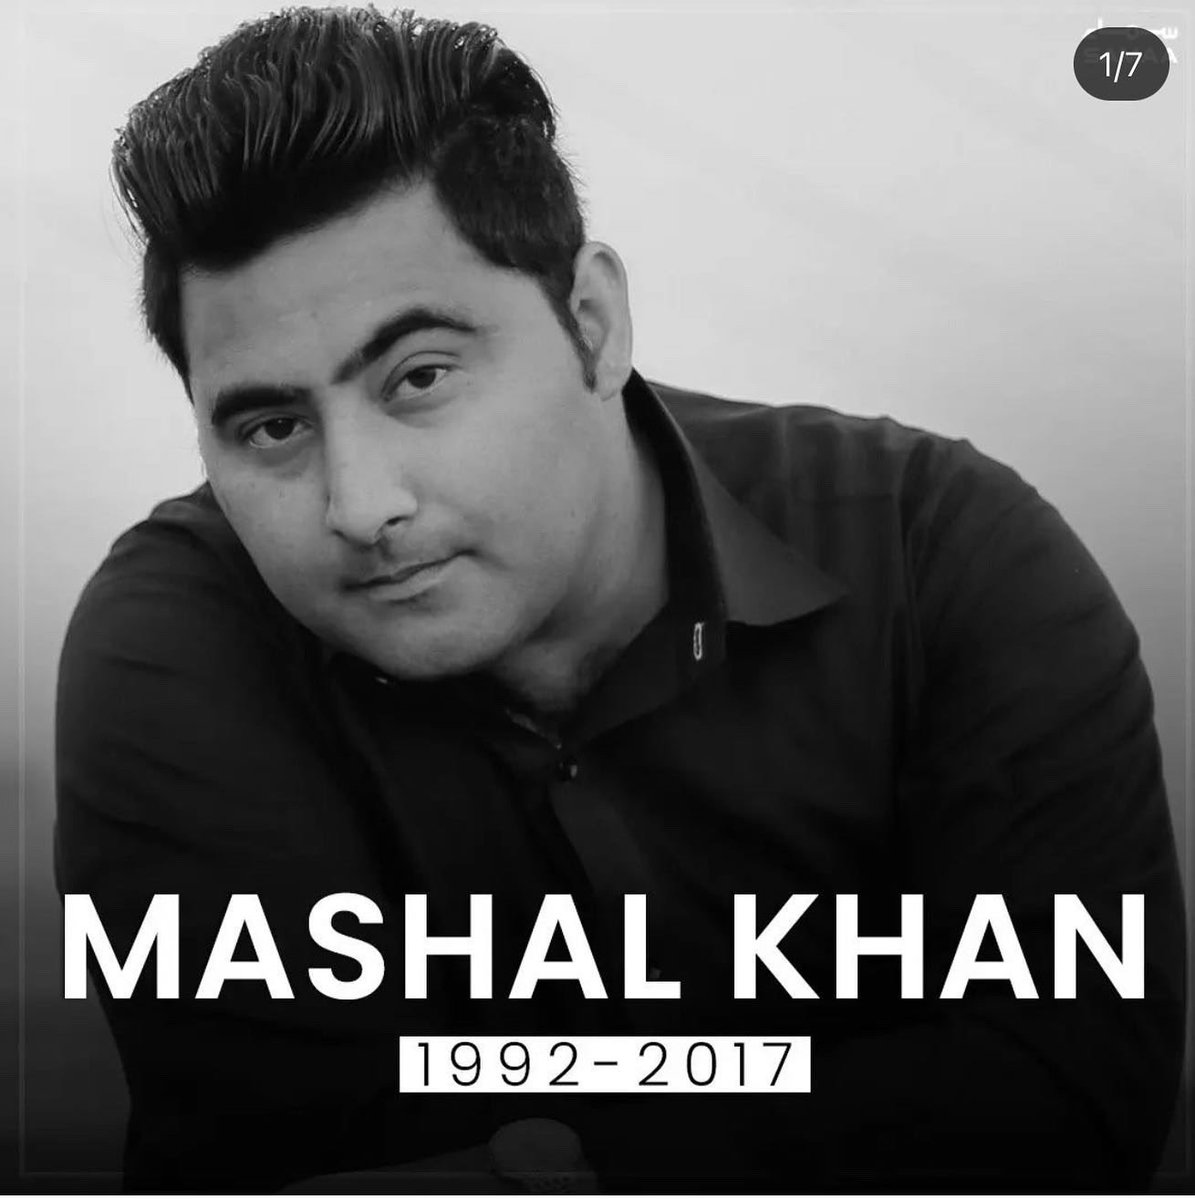 13th April - 7th death anniversary of my beloved brother Mashal Khan Shaheed who enlightened the flames of hope in our lives by losing his life. The day reminds me an inhumane act of barbarism. Mashal Khan |The Humanist مشال آج تم یاد بے حساب آئے #mashalkhanshaheed